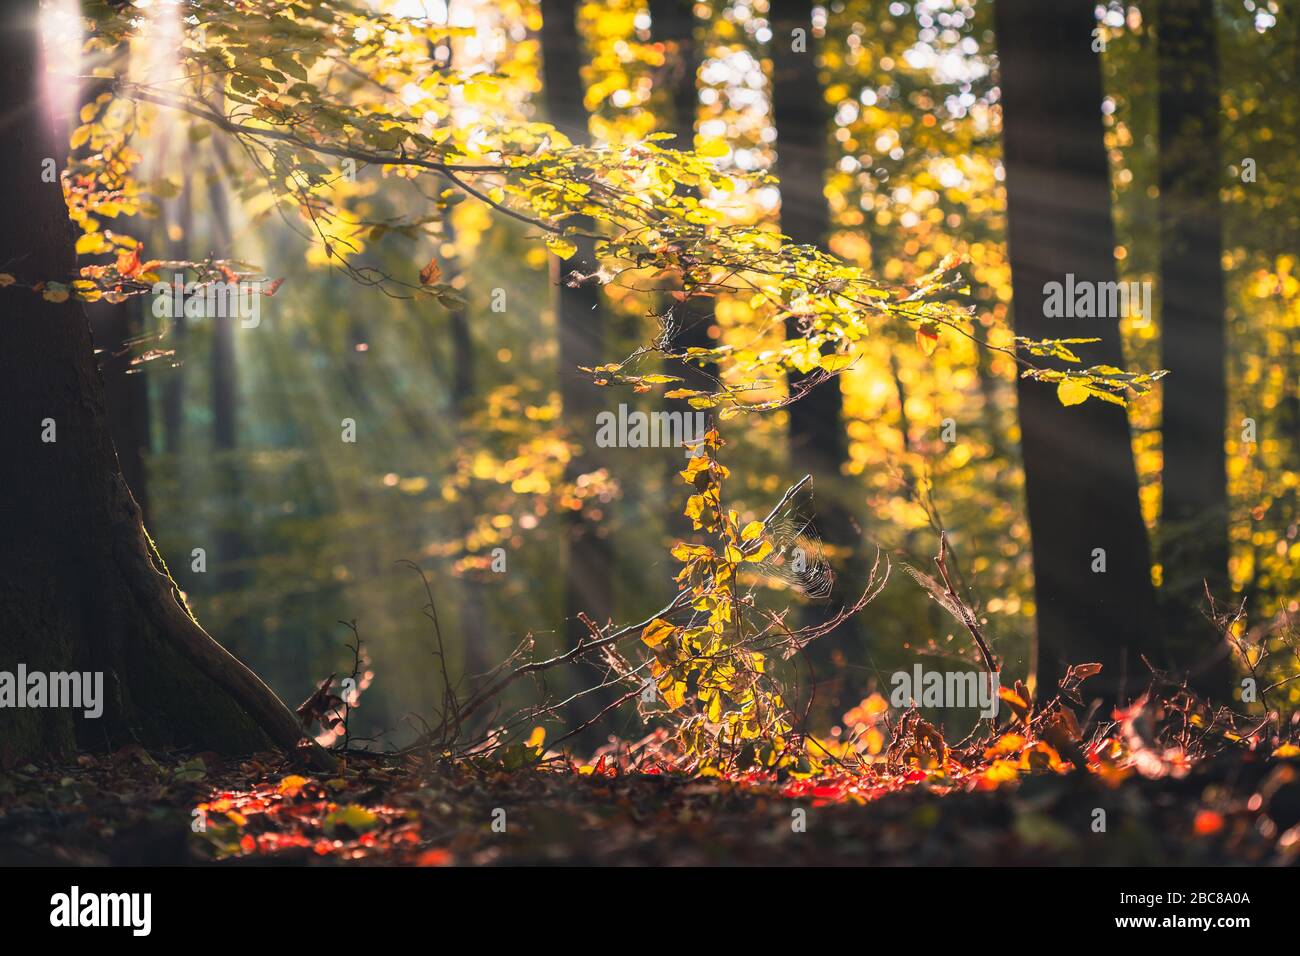 Golden autumn scene in a forest, with falling leaves and sun shining through the trees. Sun rays coming through the leaves. Stock Photo